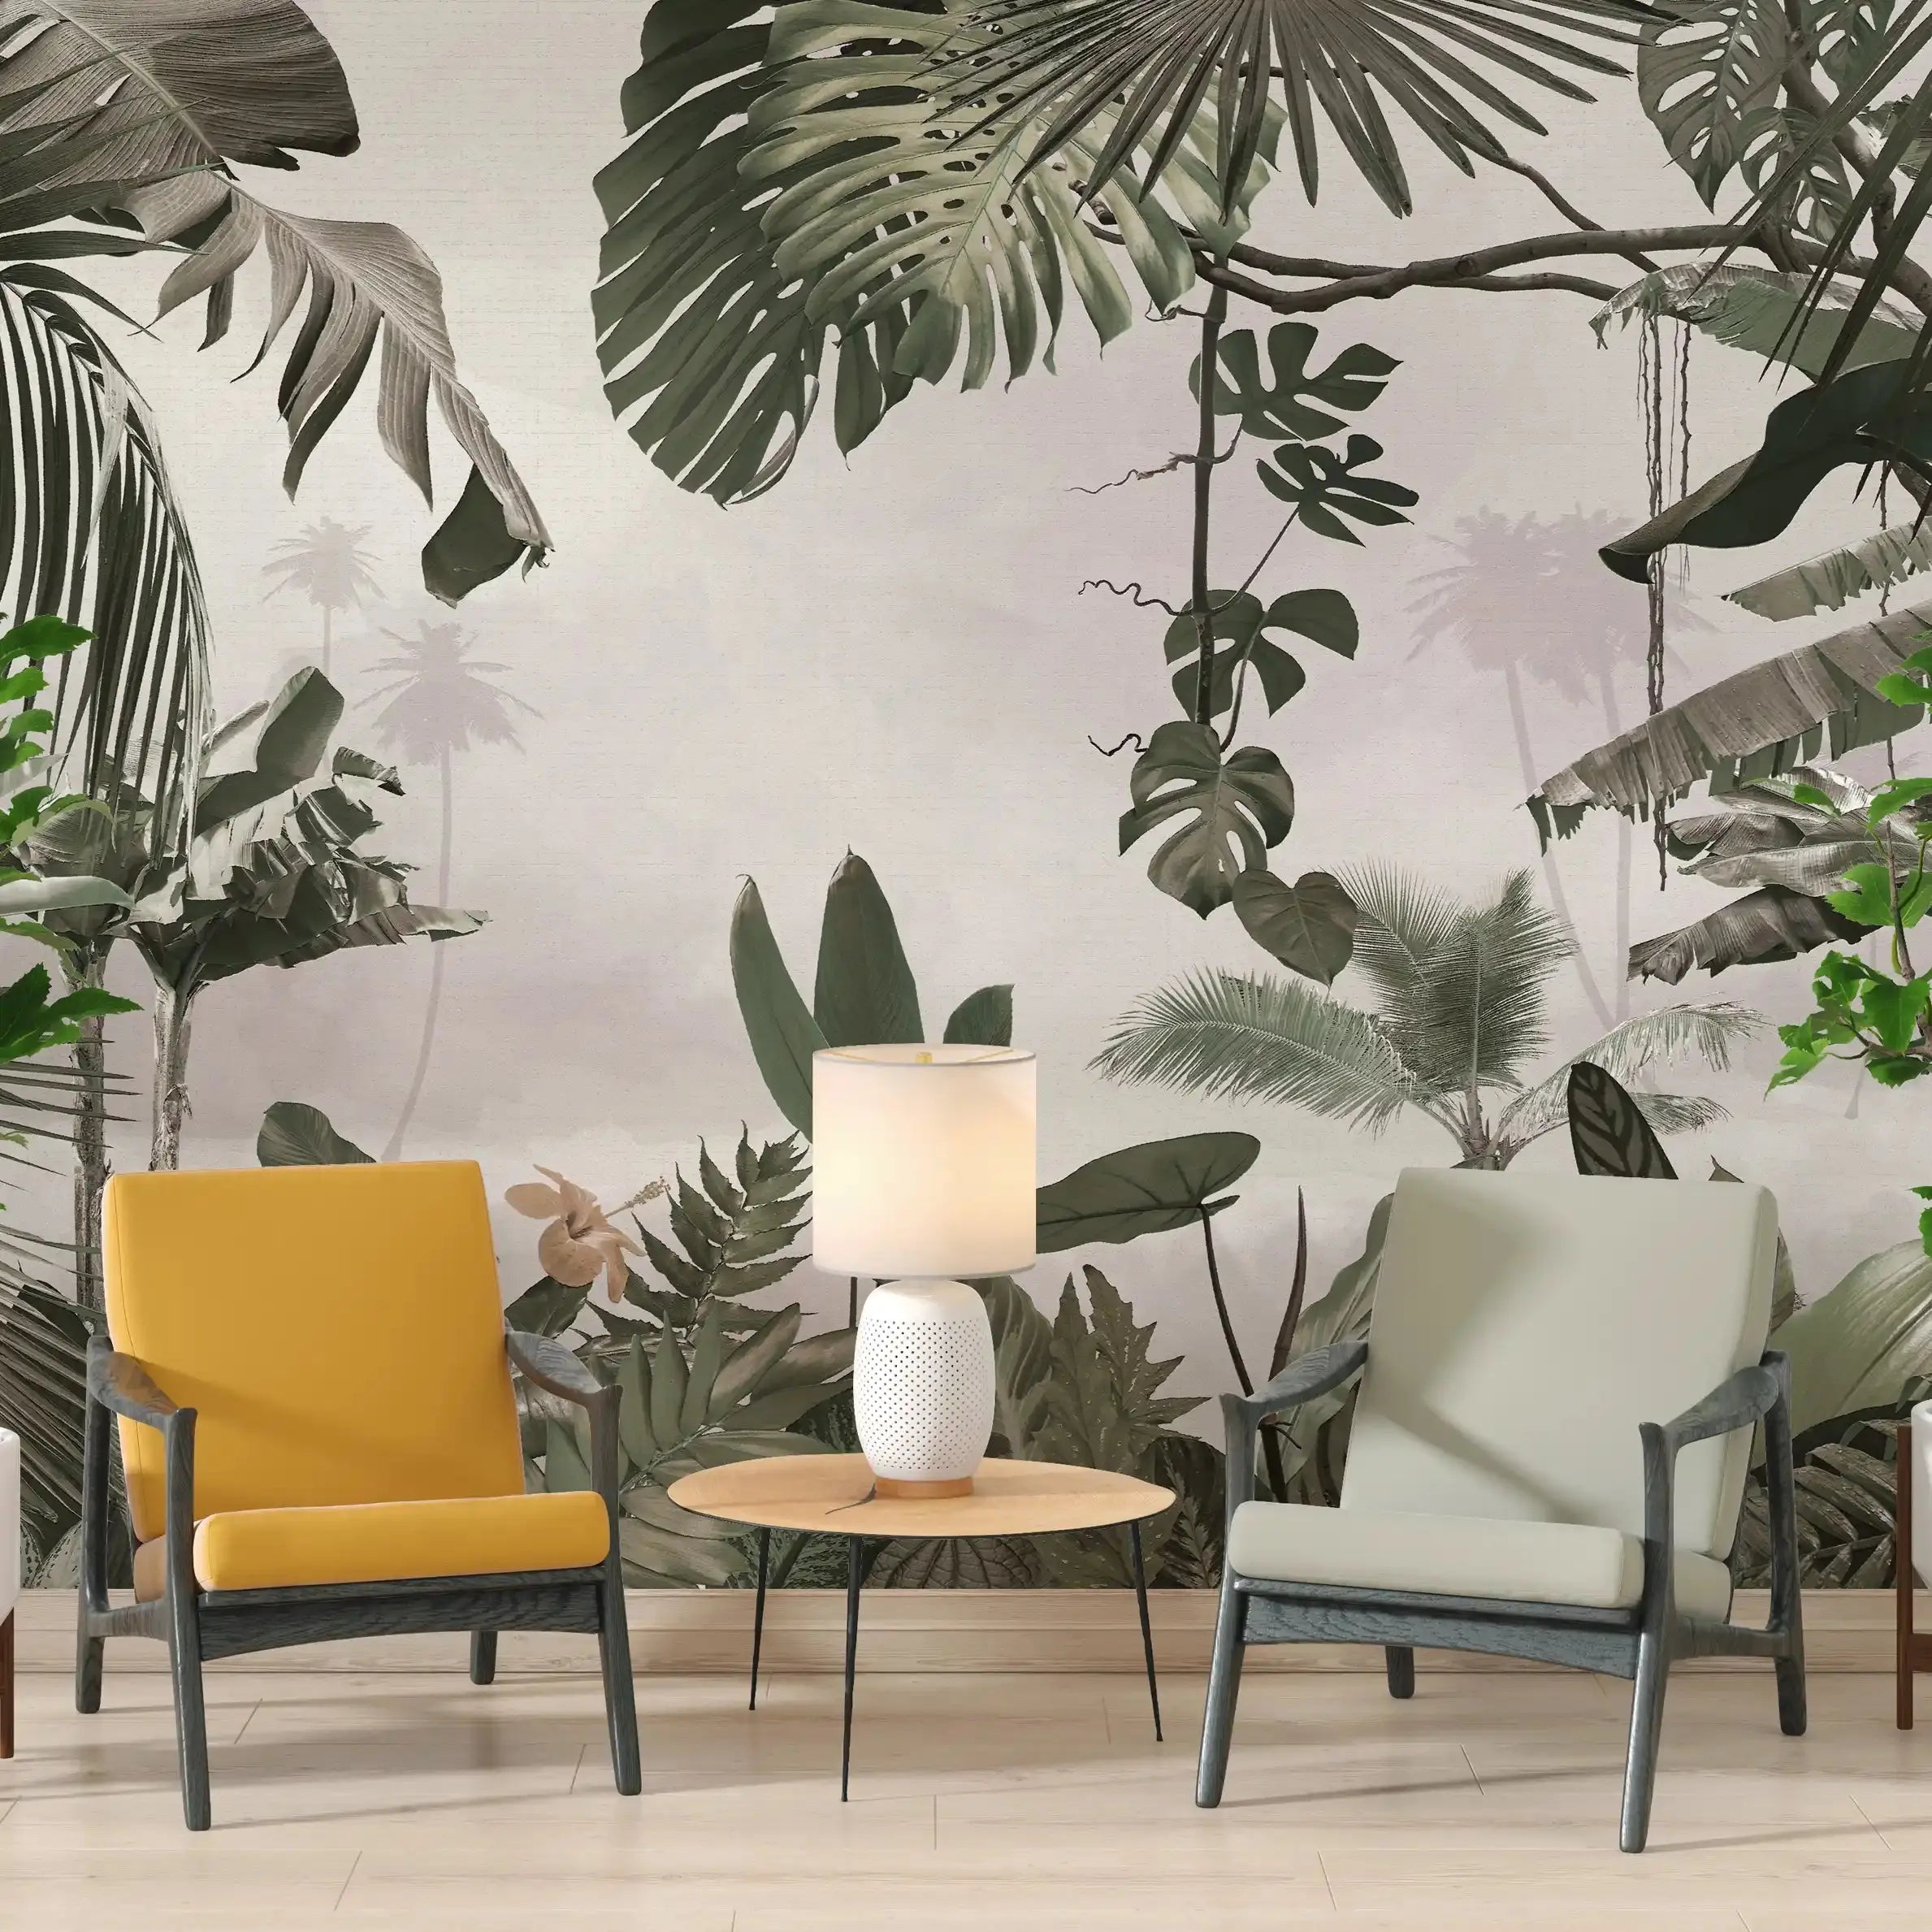 3014-C / Removable Wallpaper Peel and Stick - Abstract Colorful Tropical Plants Design for Modern Home Decor - Artevella